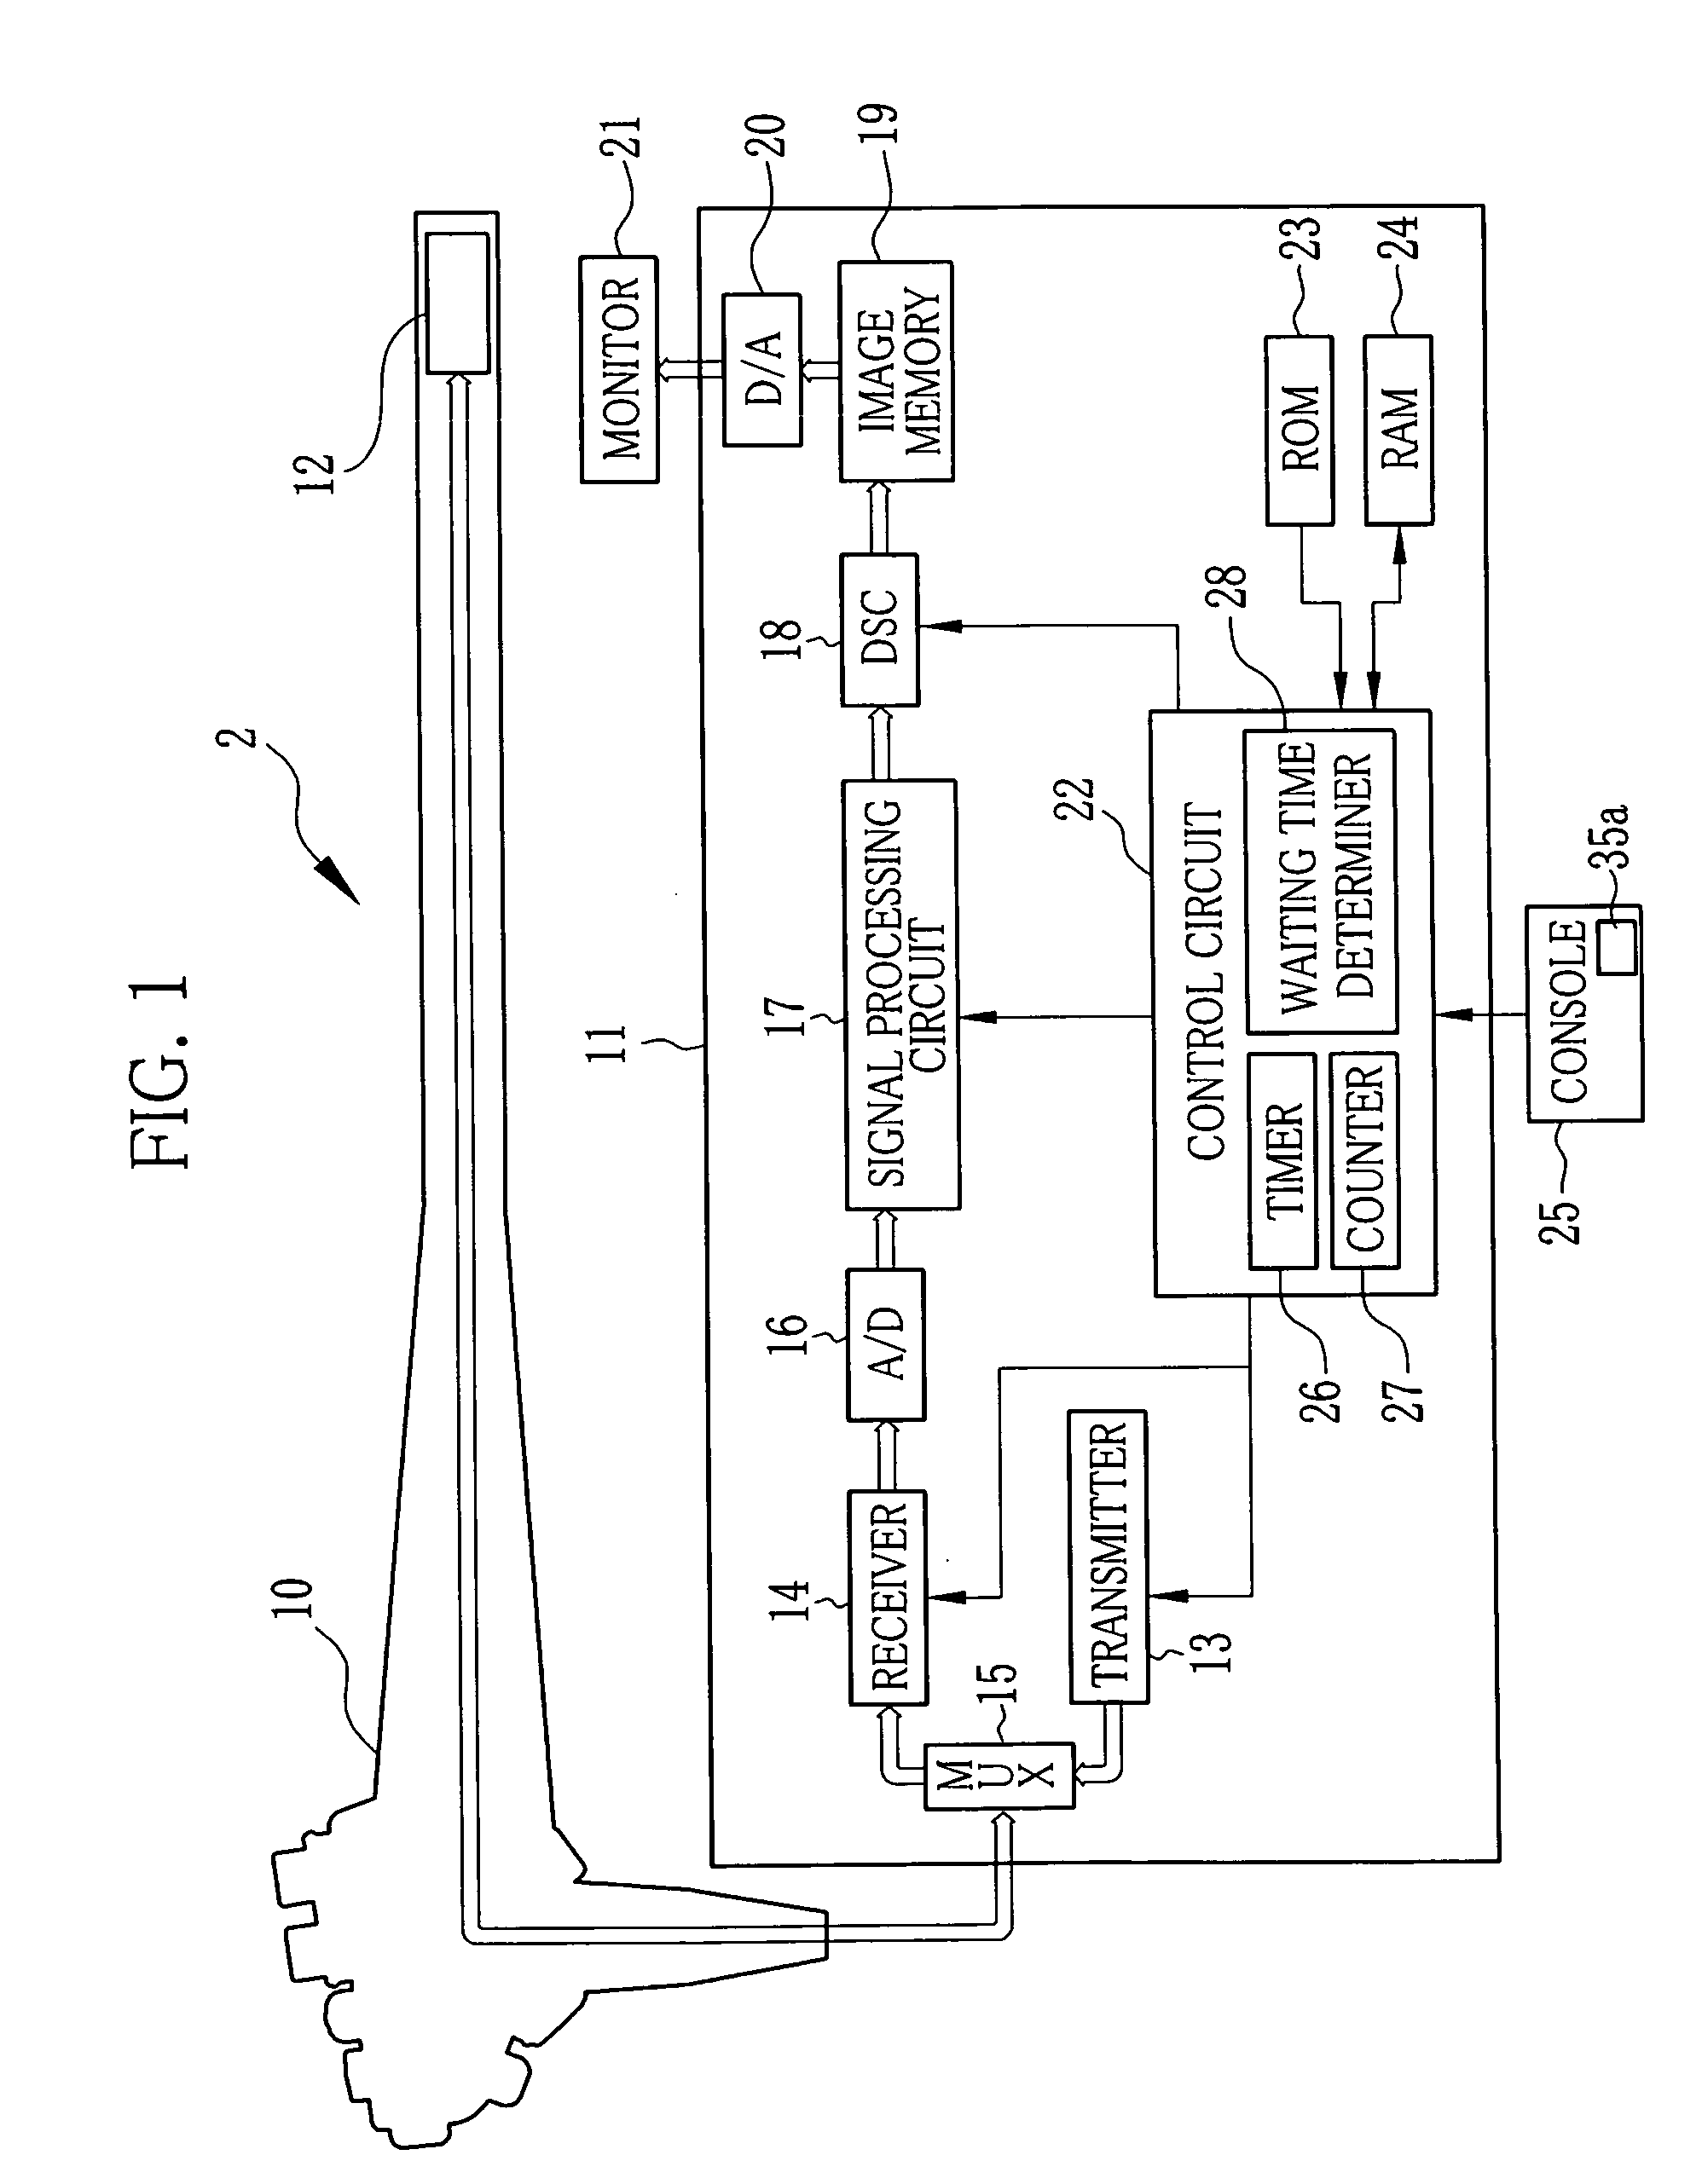 Ultrasound observation device and method for controlling operation thereof